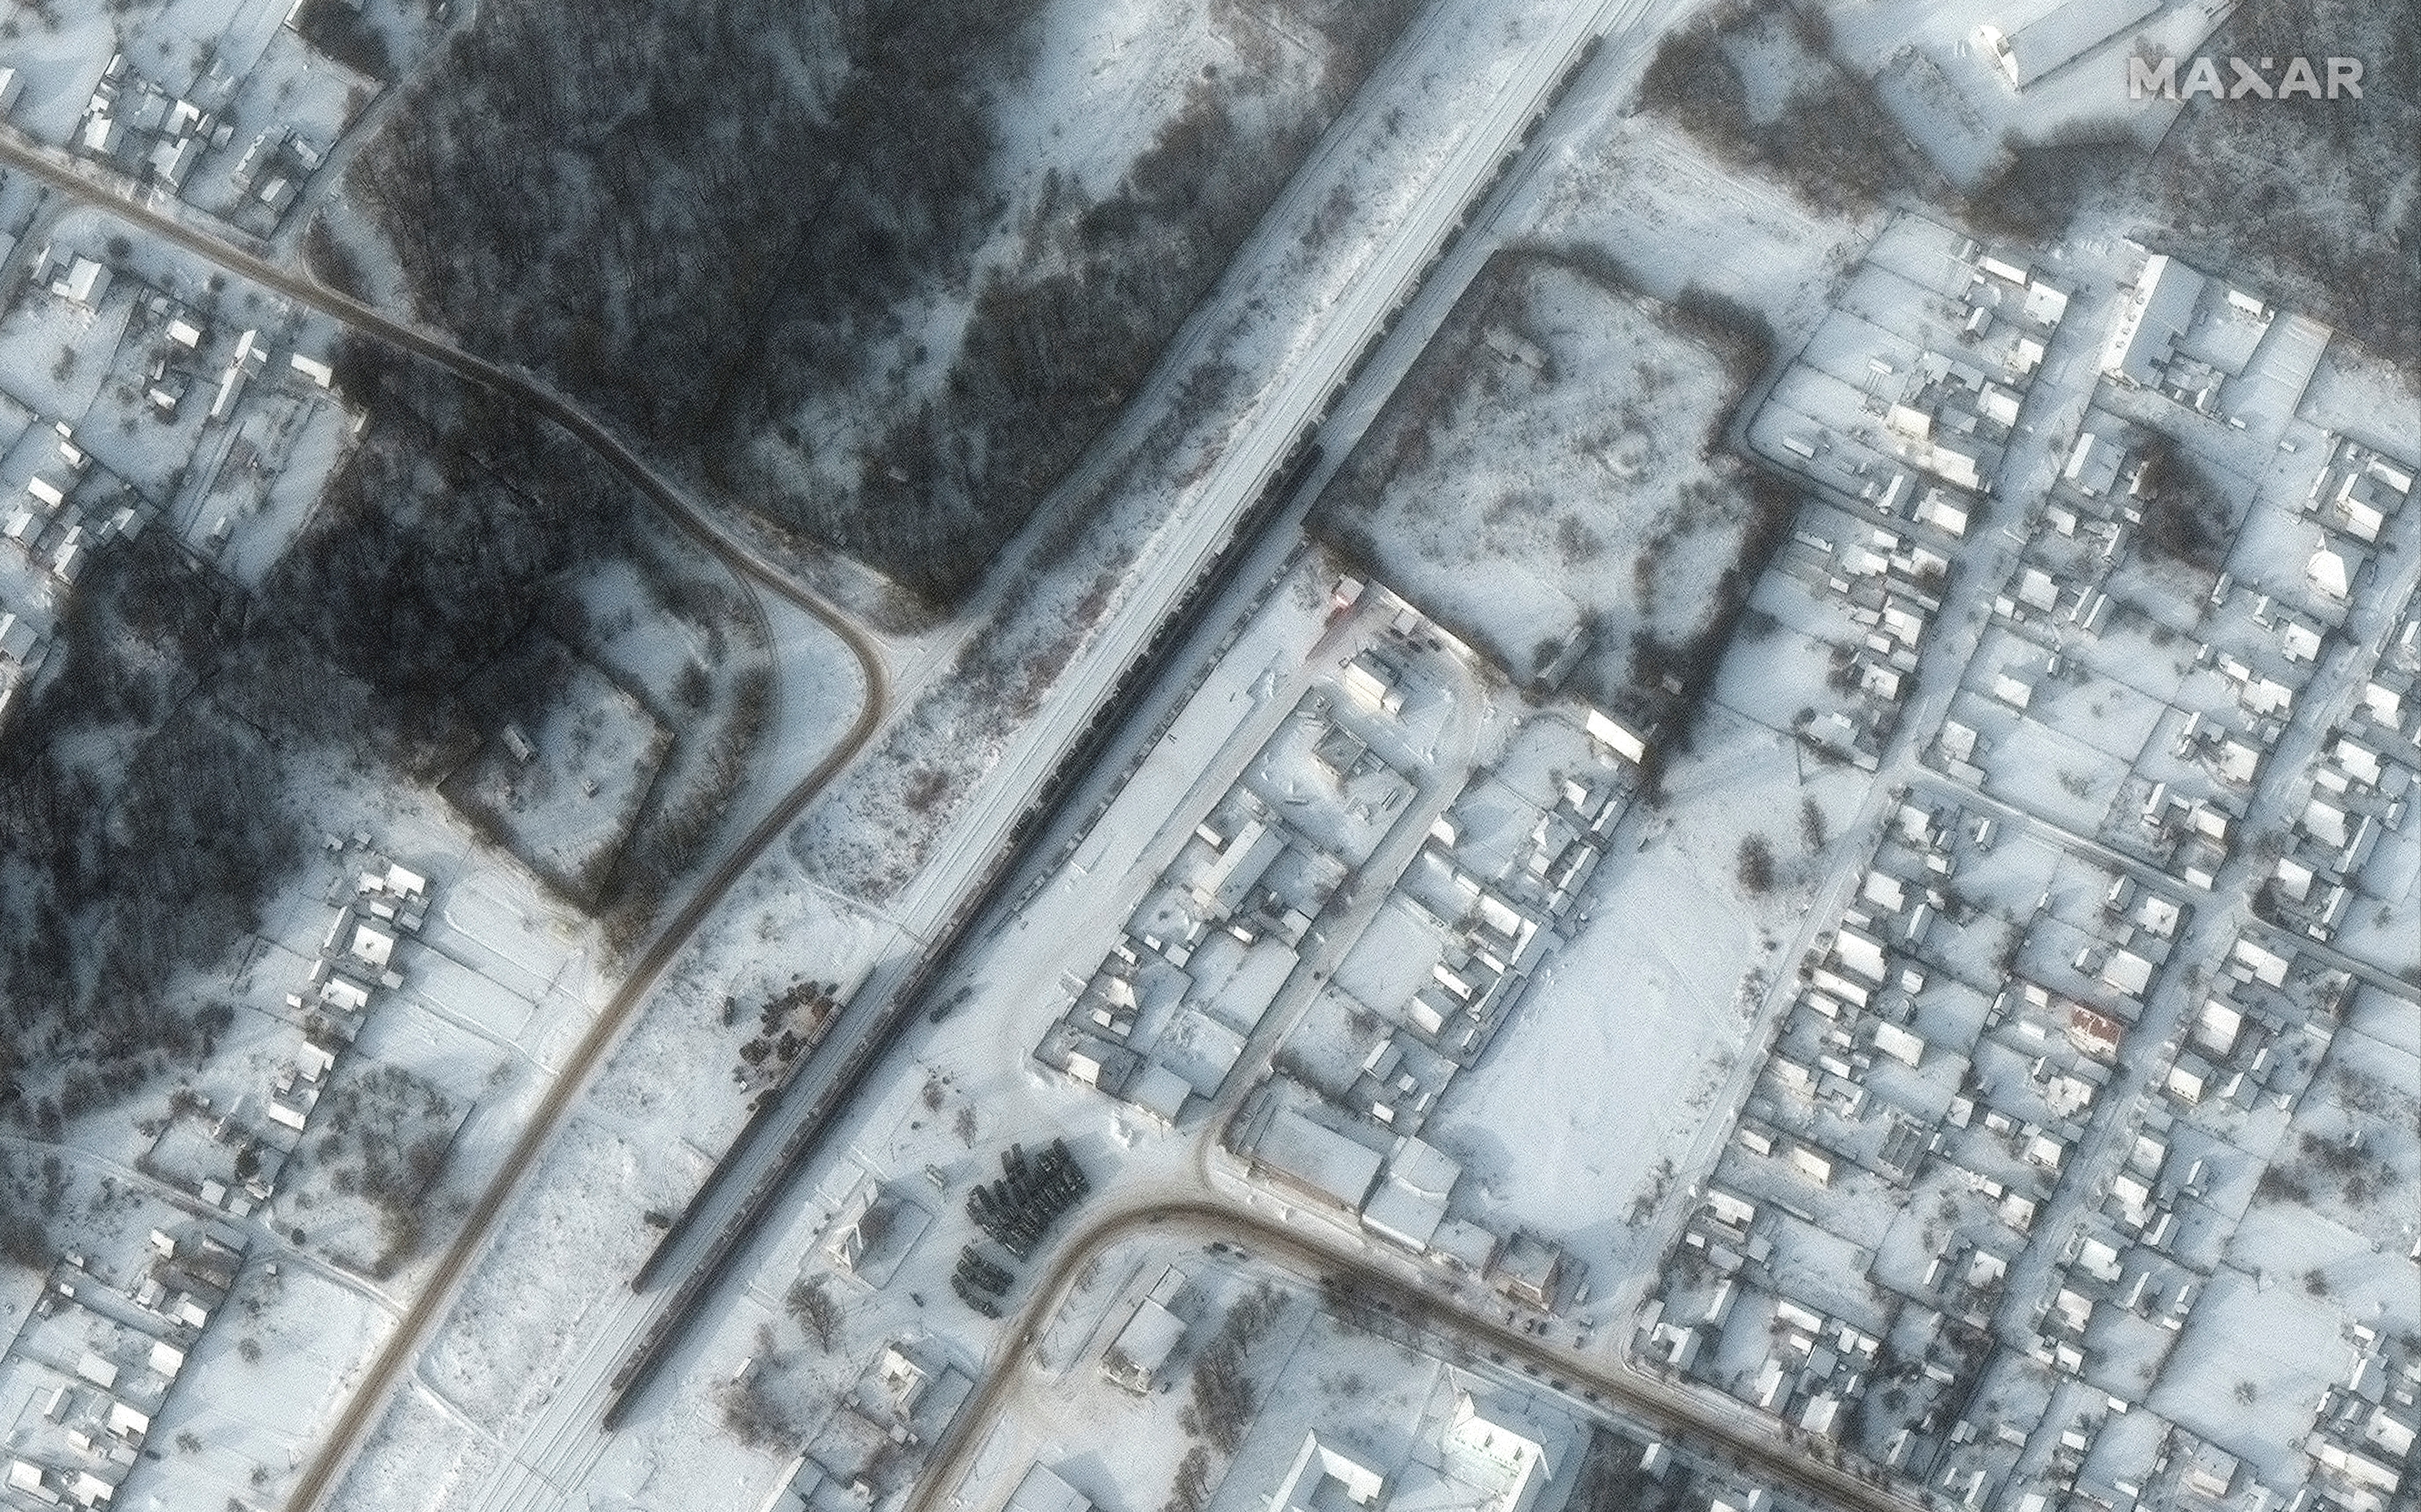 A satellite image shows equipment deployed at Klimovo Railyard in Klimovo, Russia January 19, 2022.  ©2022 Maxar Technologies/Handout via REUTERS